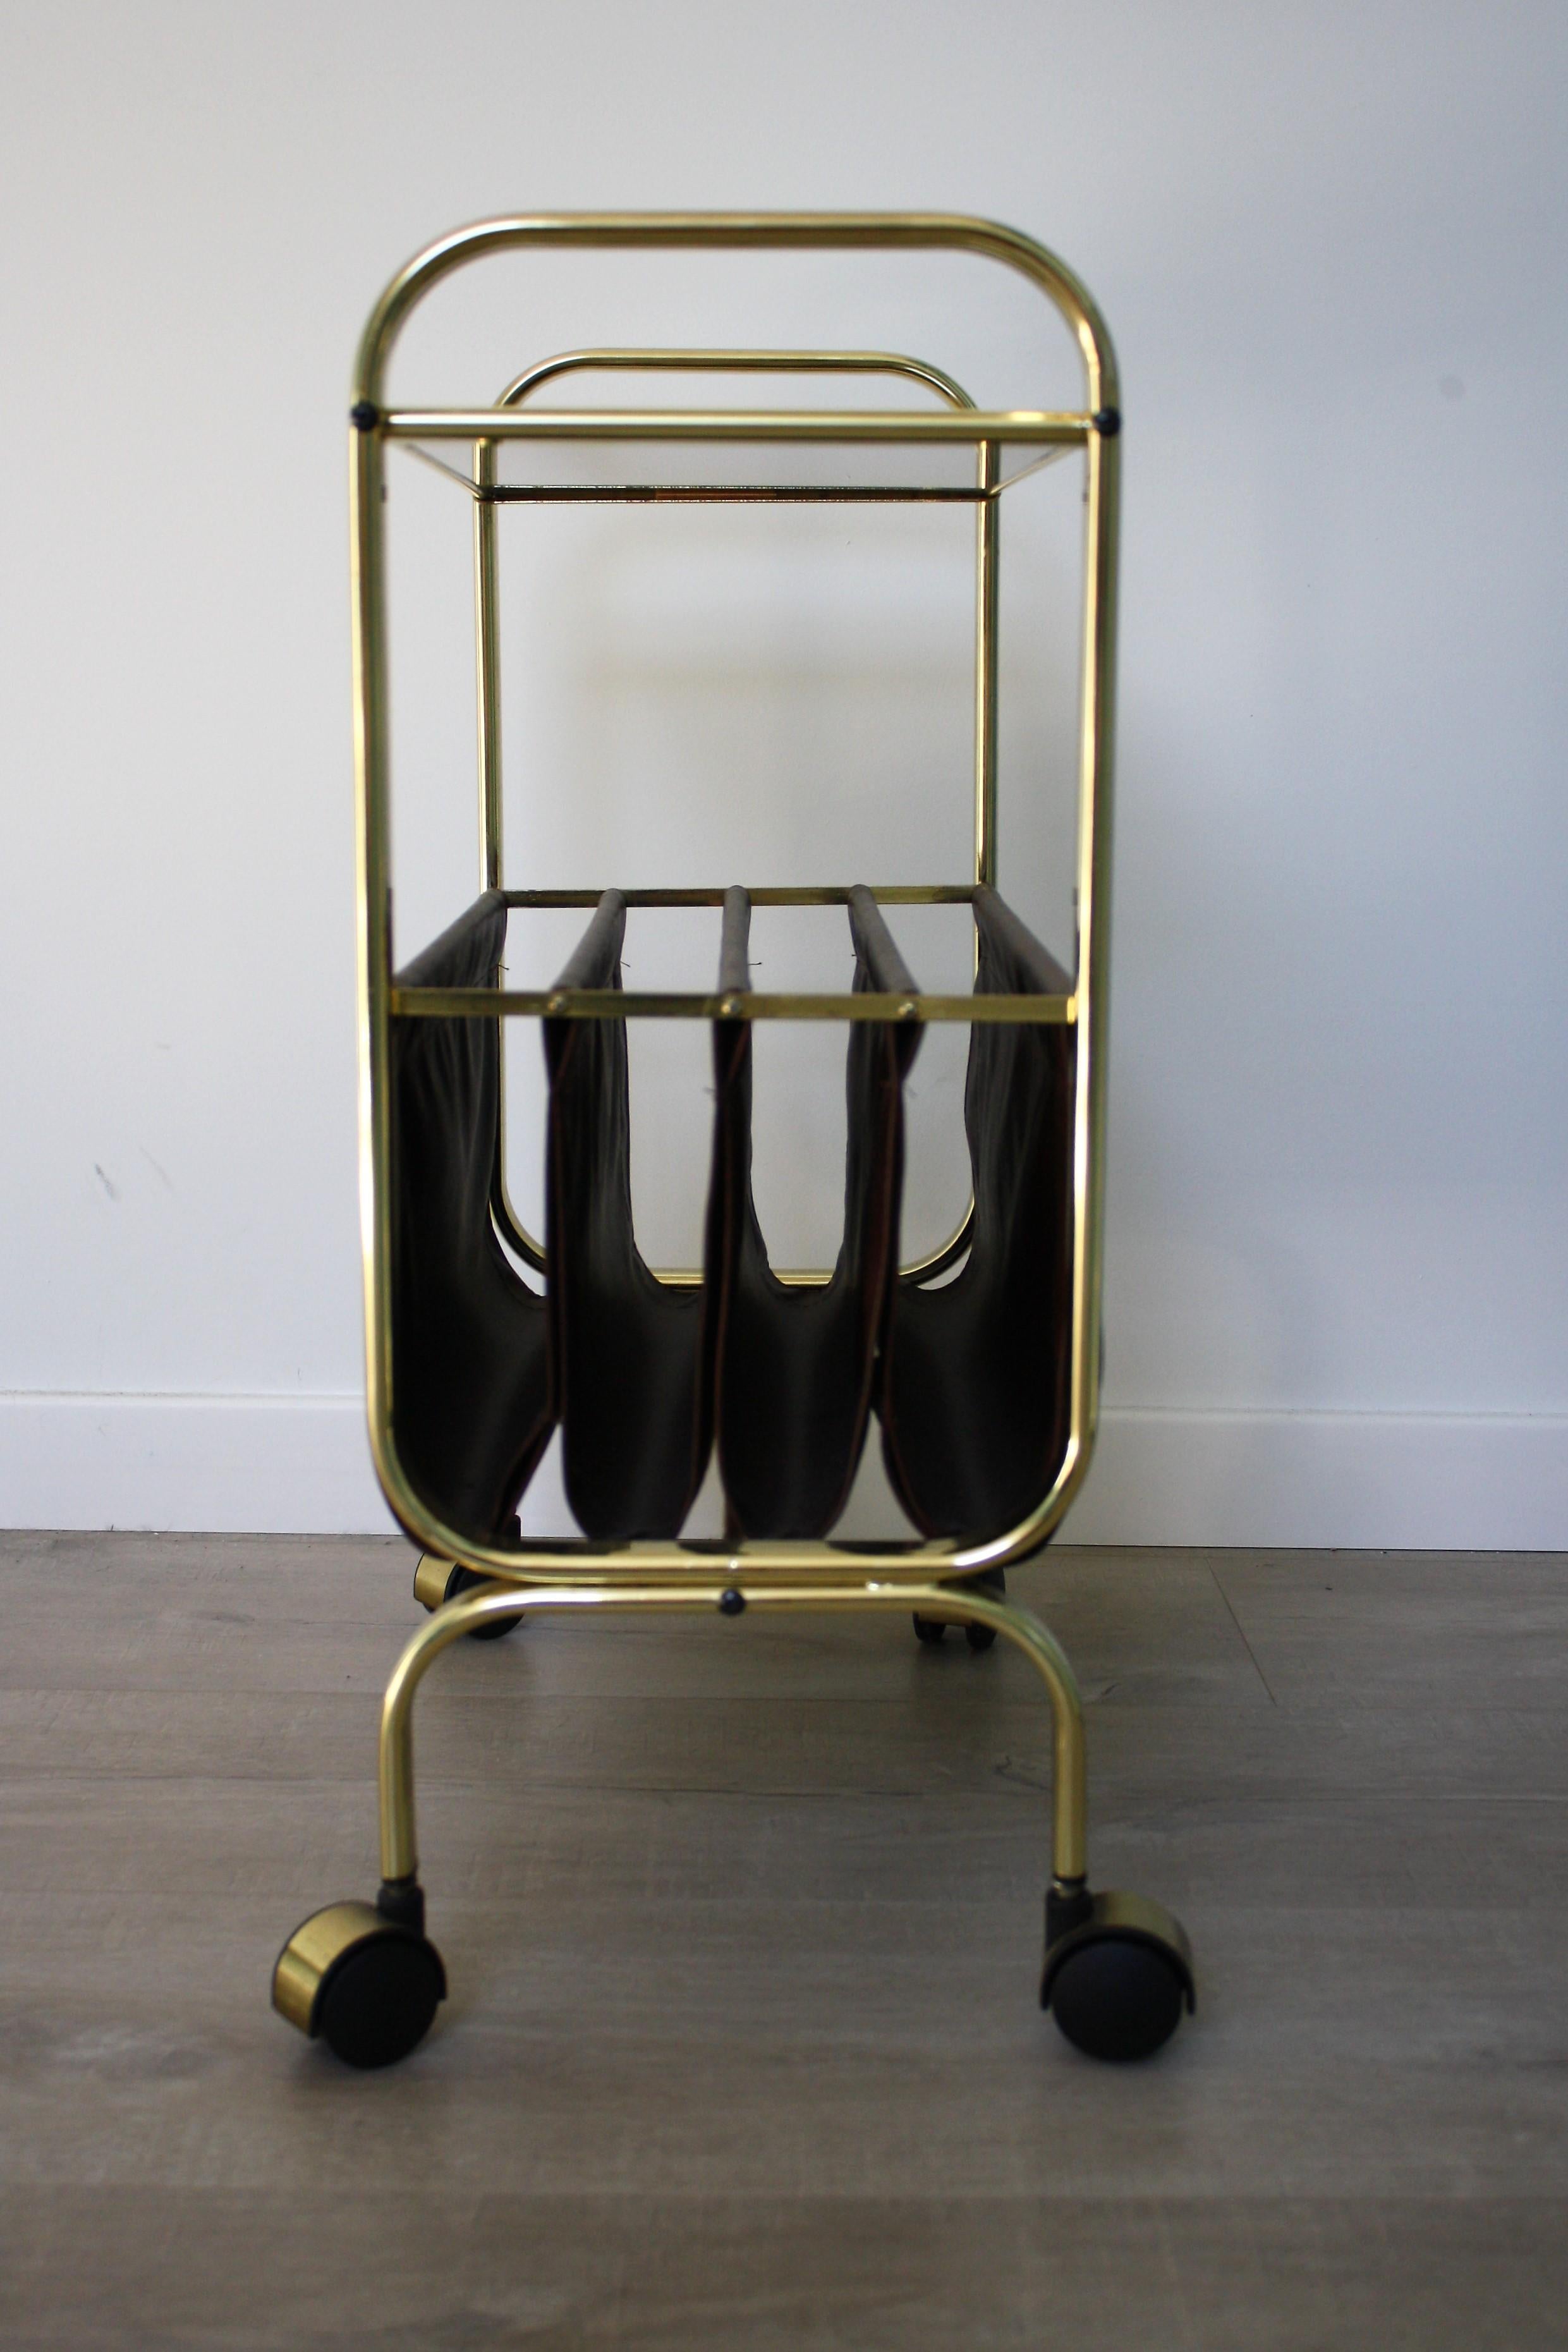 Belgian Vintage Brass Magazine Rack or Side Table with Glass, 1970s Belgium